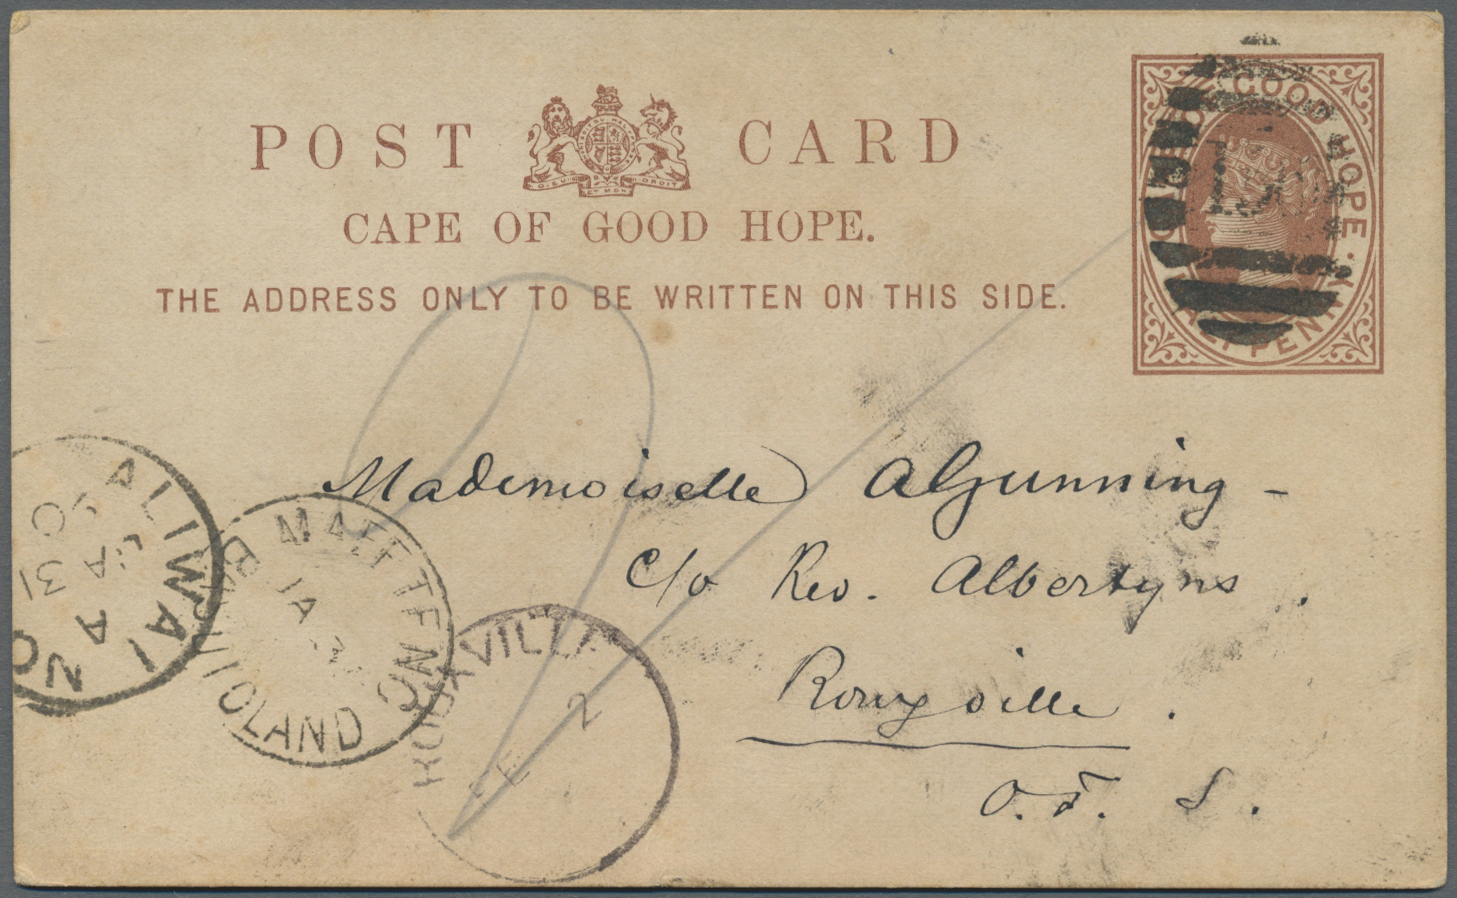 GA Basutoland: 1890, CGH Card 1/2d Canc. Unclear "156" Written In "SILAFE 28 Jan. 90" With Cds "MAFETENG BASUTOLAND JA 3 - 1933-1964 Crown Colony